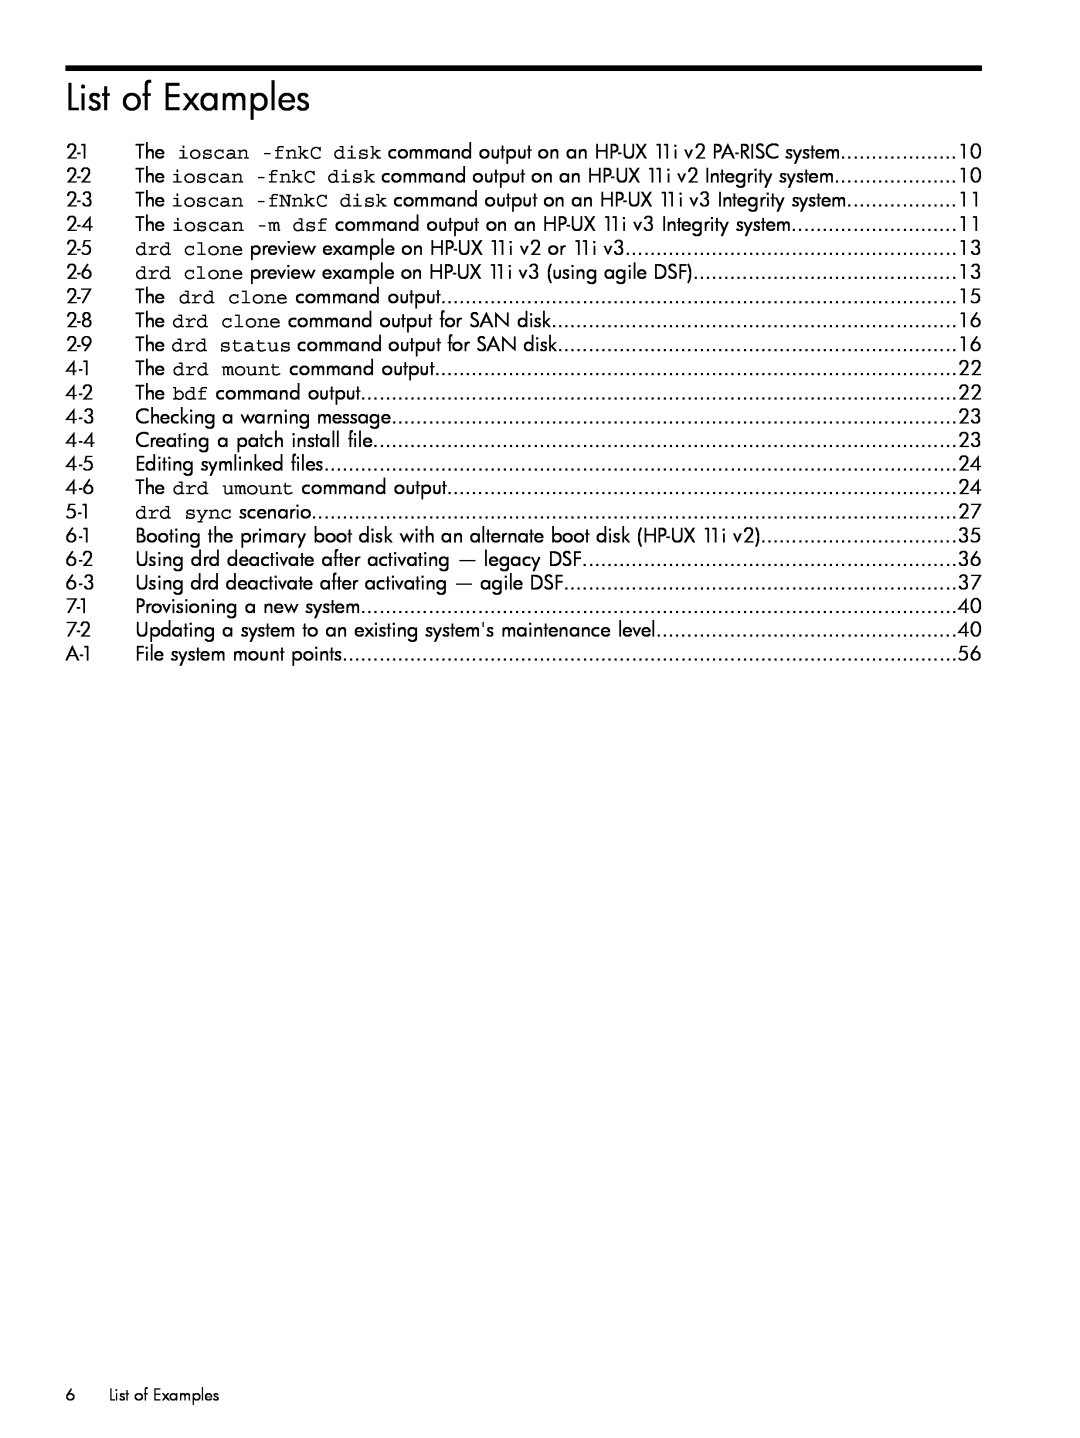 HP Dynamic Root Disk (DRD) manual List of Examples, The ioscan -m dsf command output on an HP-UX 11i v3 Integrity system 